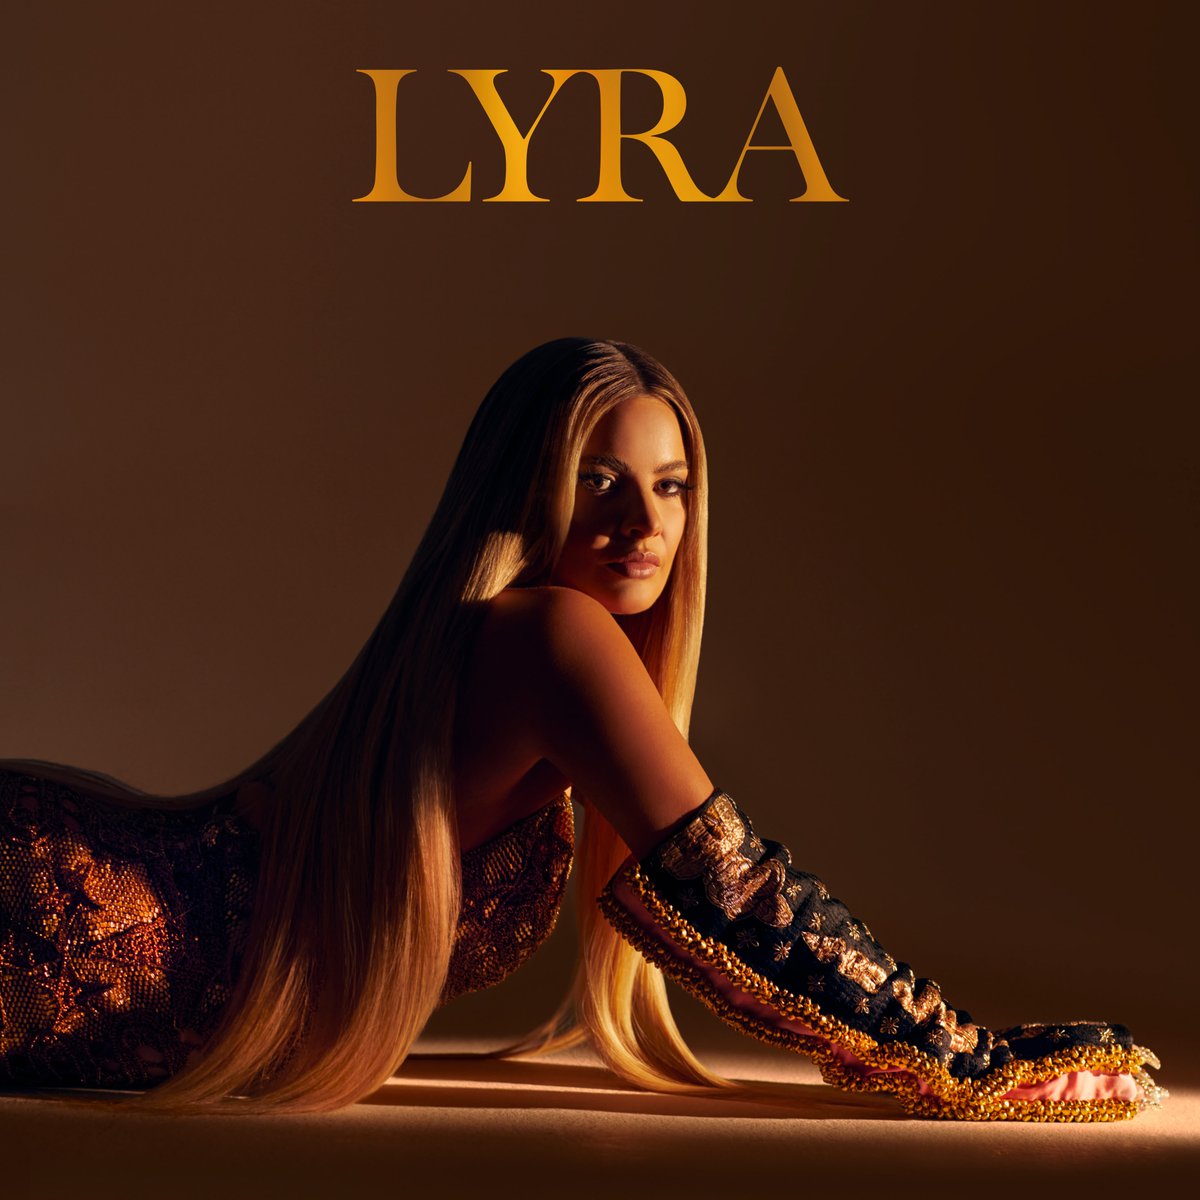 ⚜️ 'LYRA' IS OUT NOW ⚜️ The wait is finally over, the highly-anticipated debut album from @thisislyra 'LYRA' is OUT NOW! Featuring the chart-topping singles 'Chess,' 'Drink Me Up,' ‘Queen’ and 'Edge of Seventeen'. “Soulful, cool and vibrant, Lyra's debut feels both…